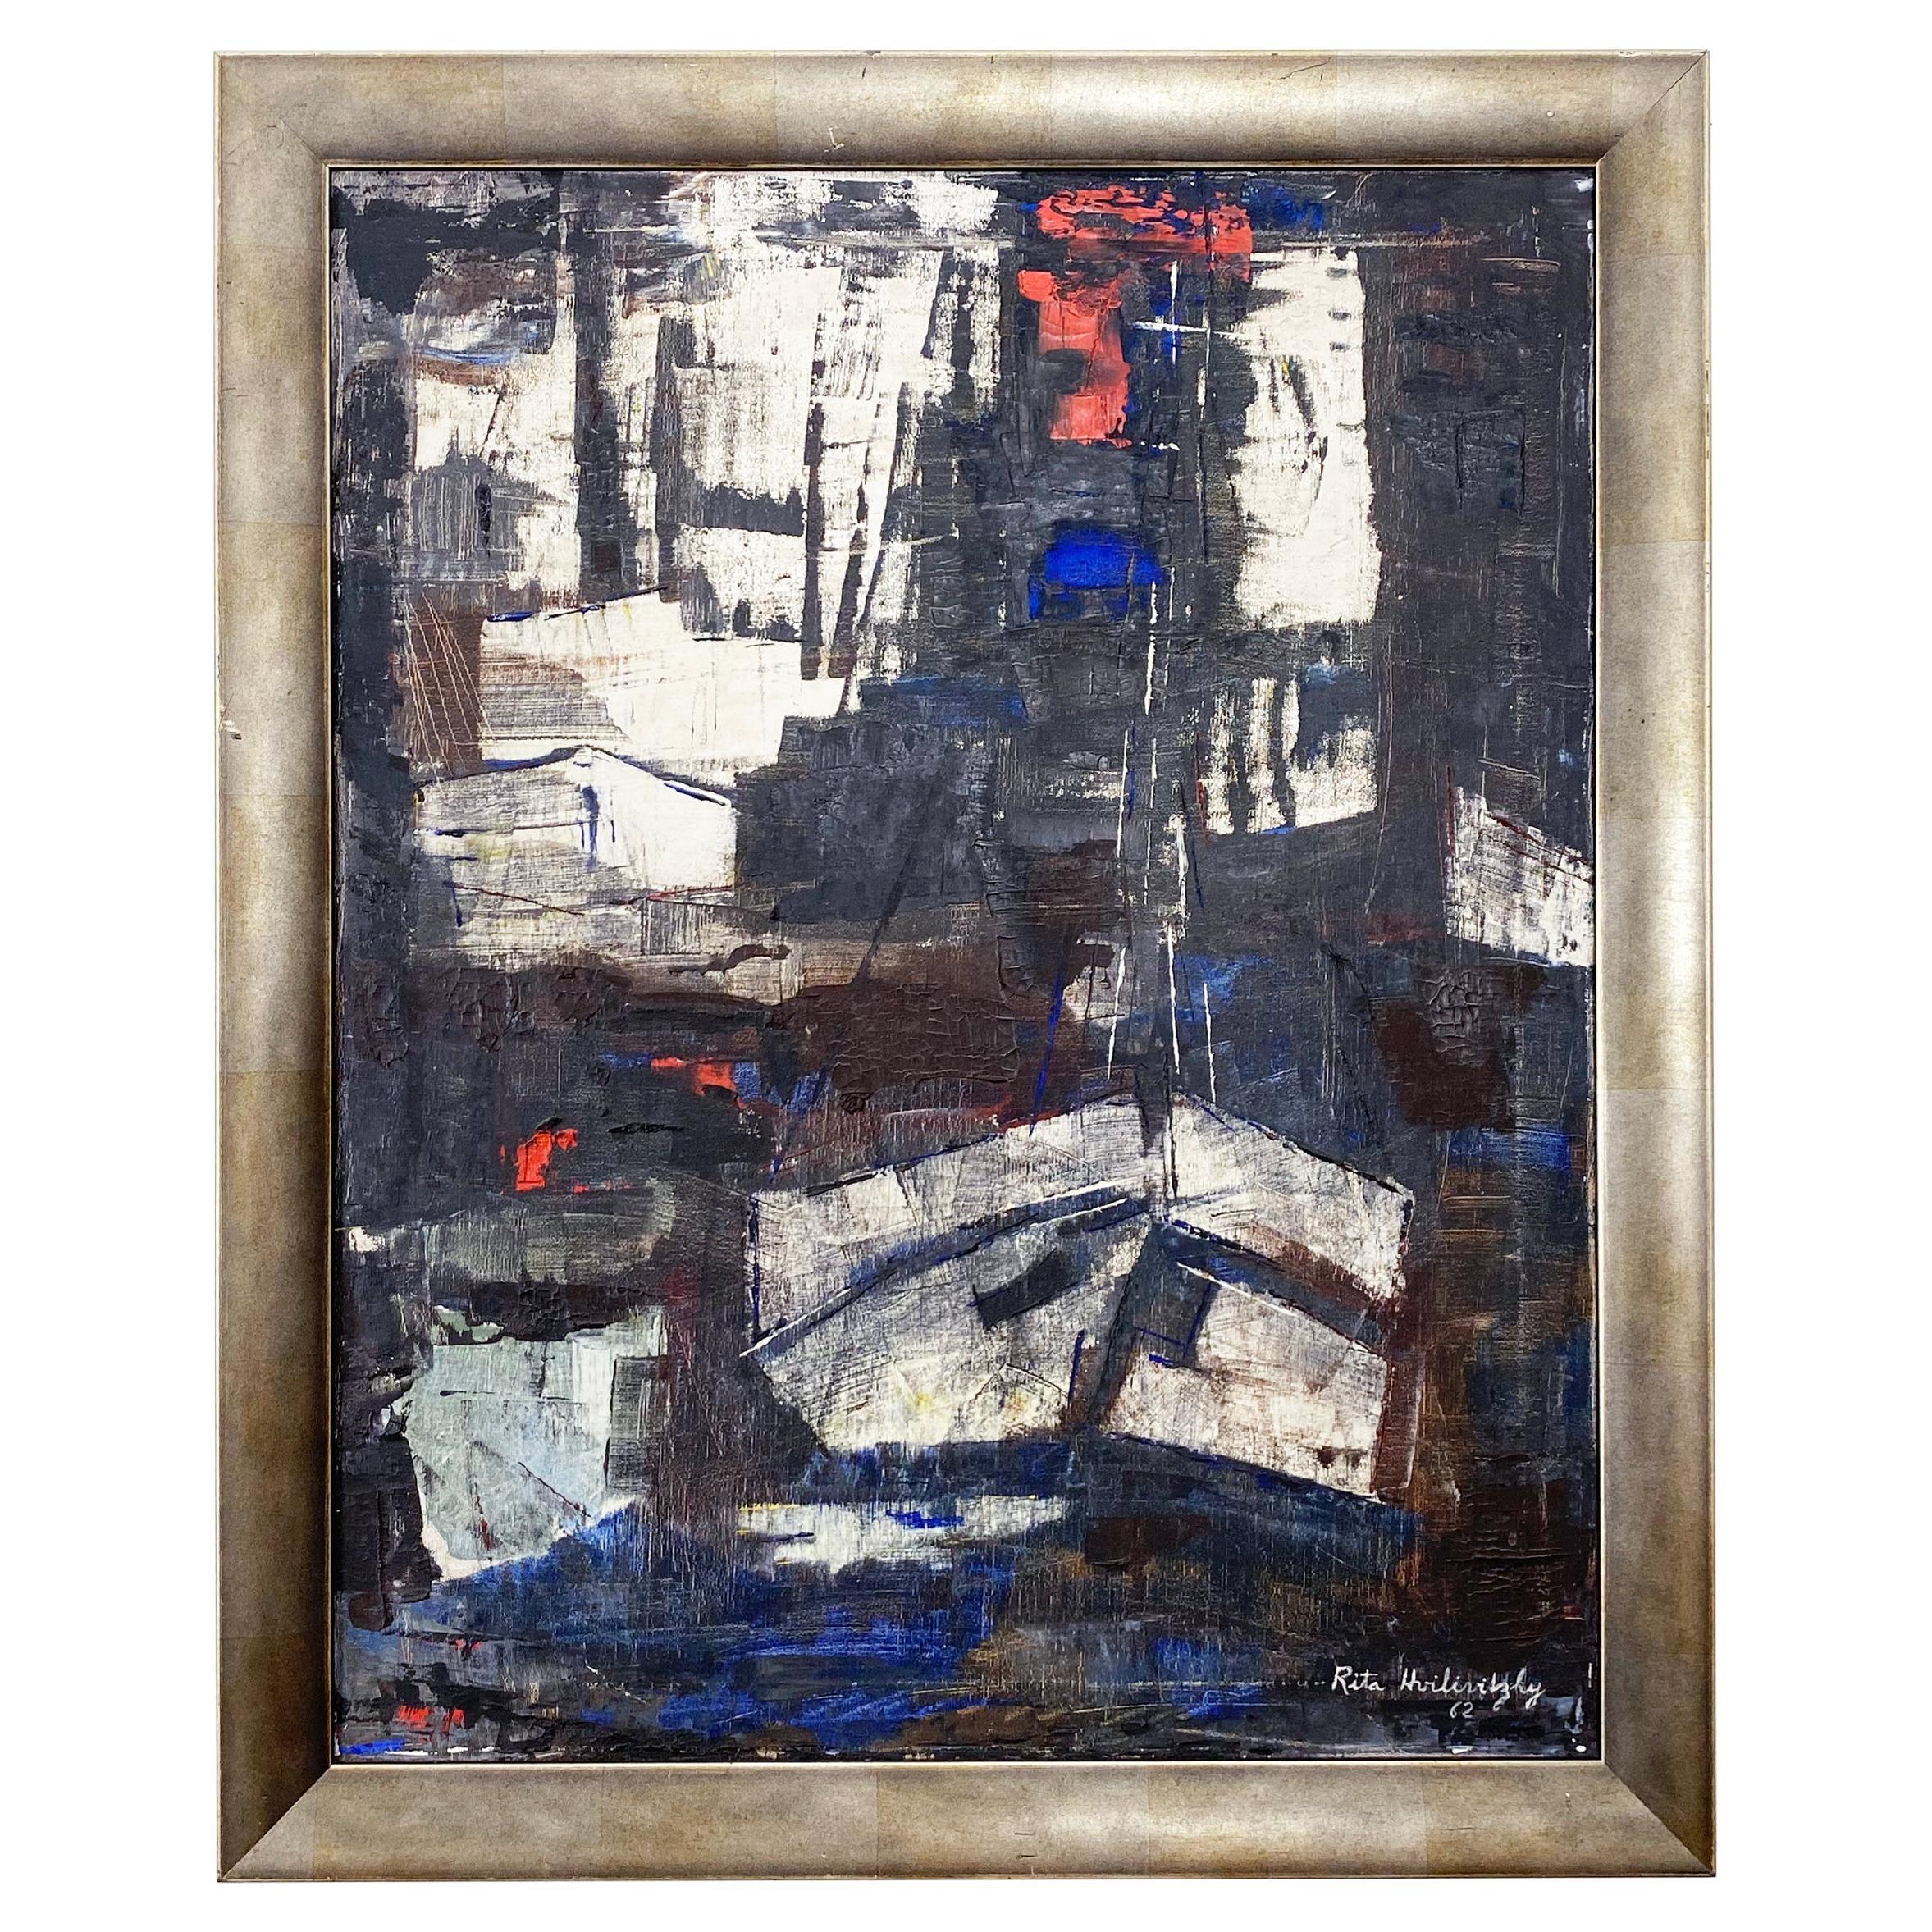 Original Abstract Oil Painting on Canvas by Rita Hvilivitzky, 1962